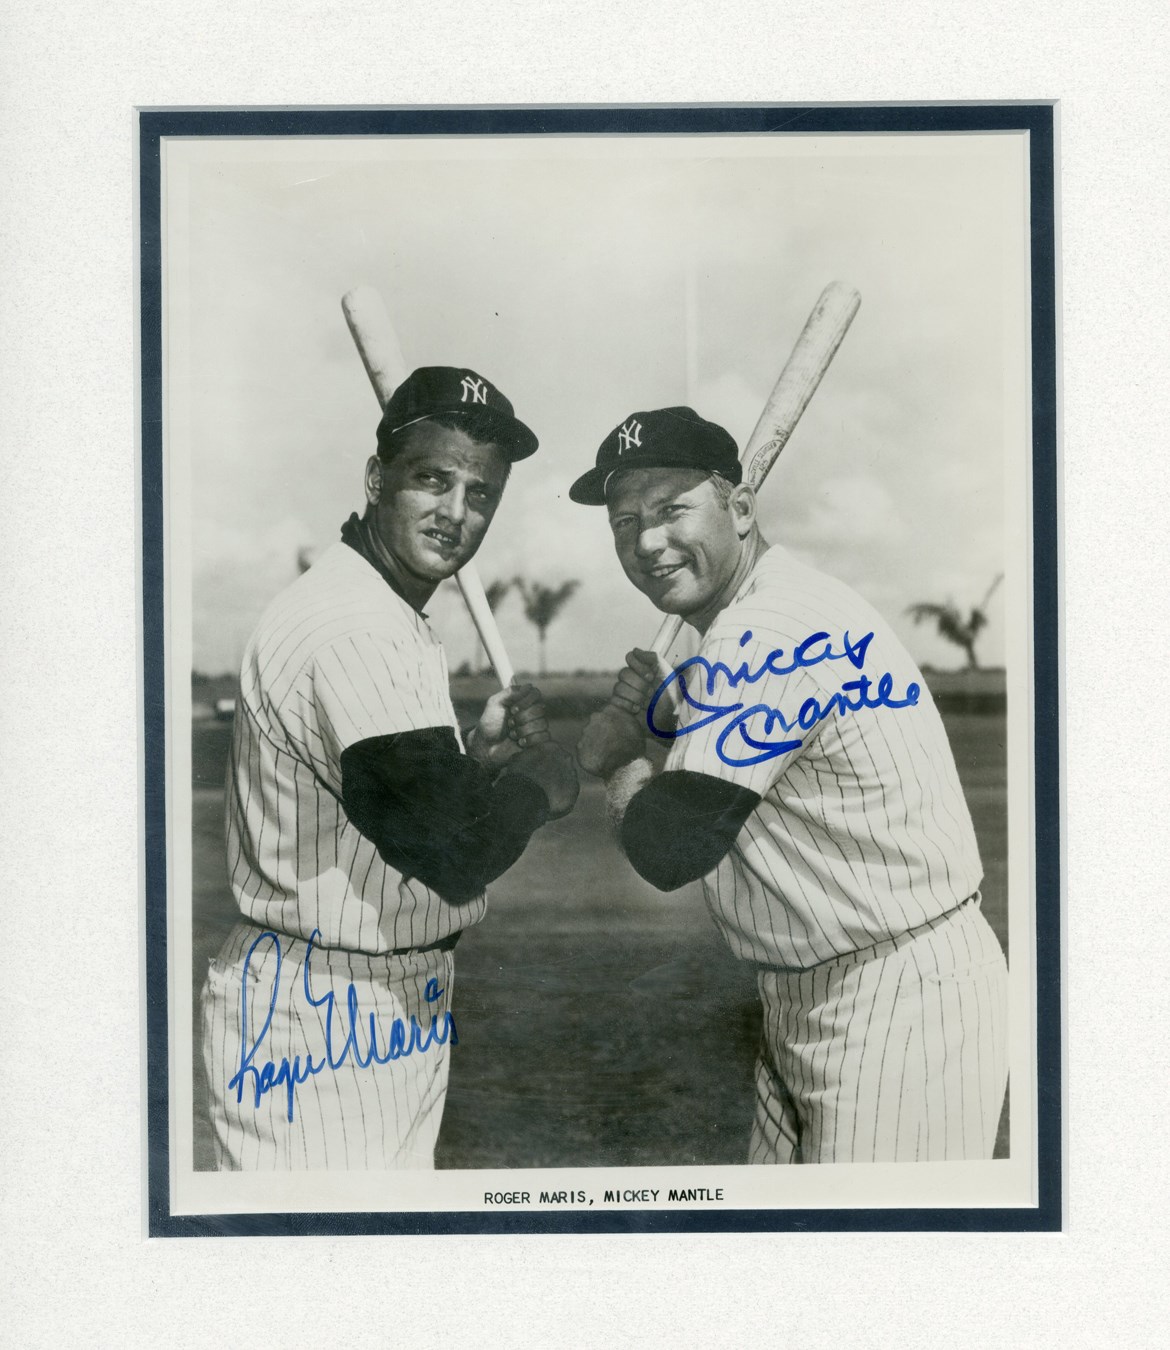 Mantle and Maris - Mickey Mantle & Roger Maris Signed Photograph